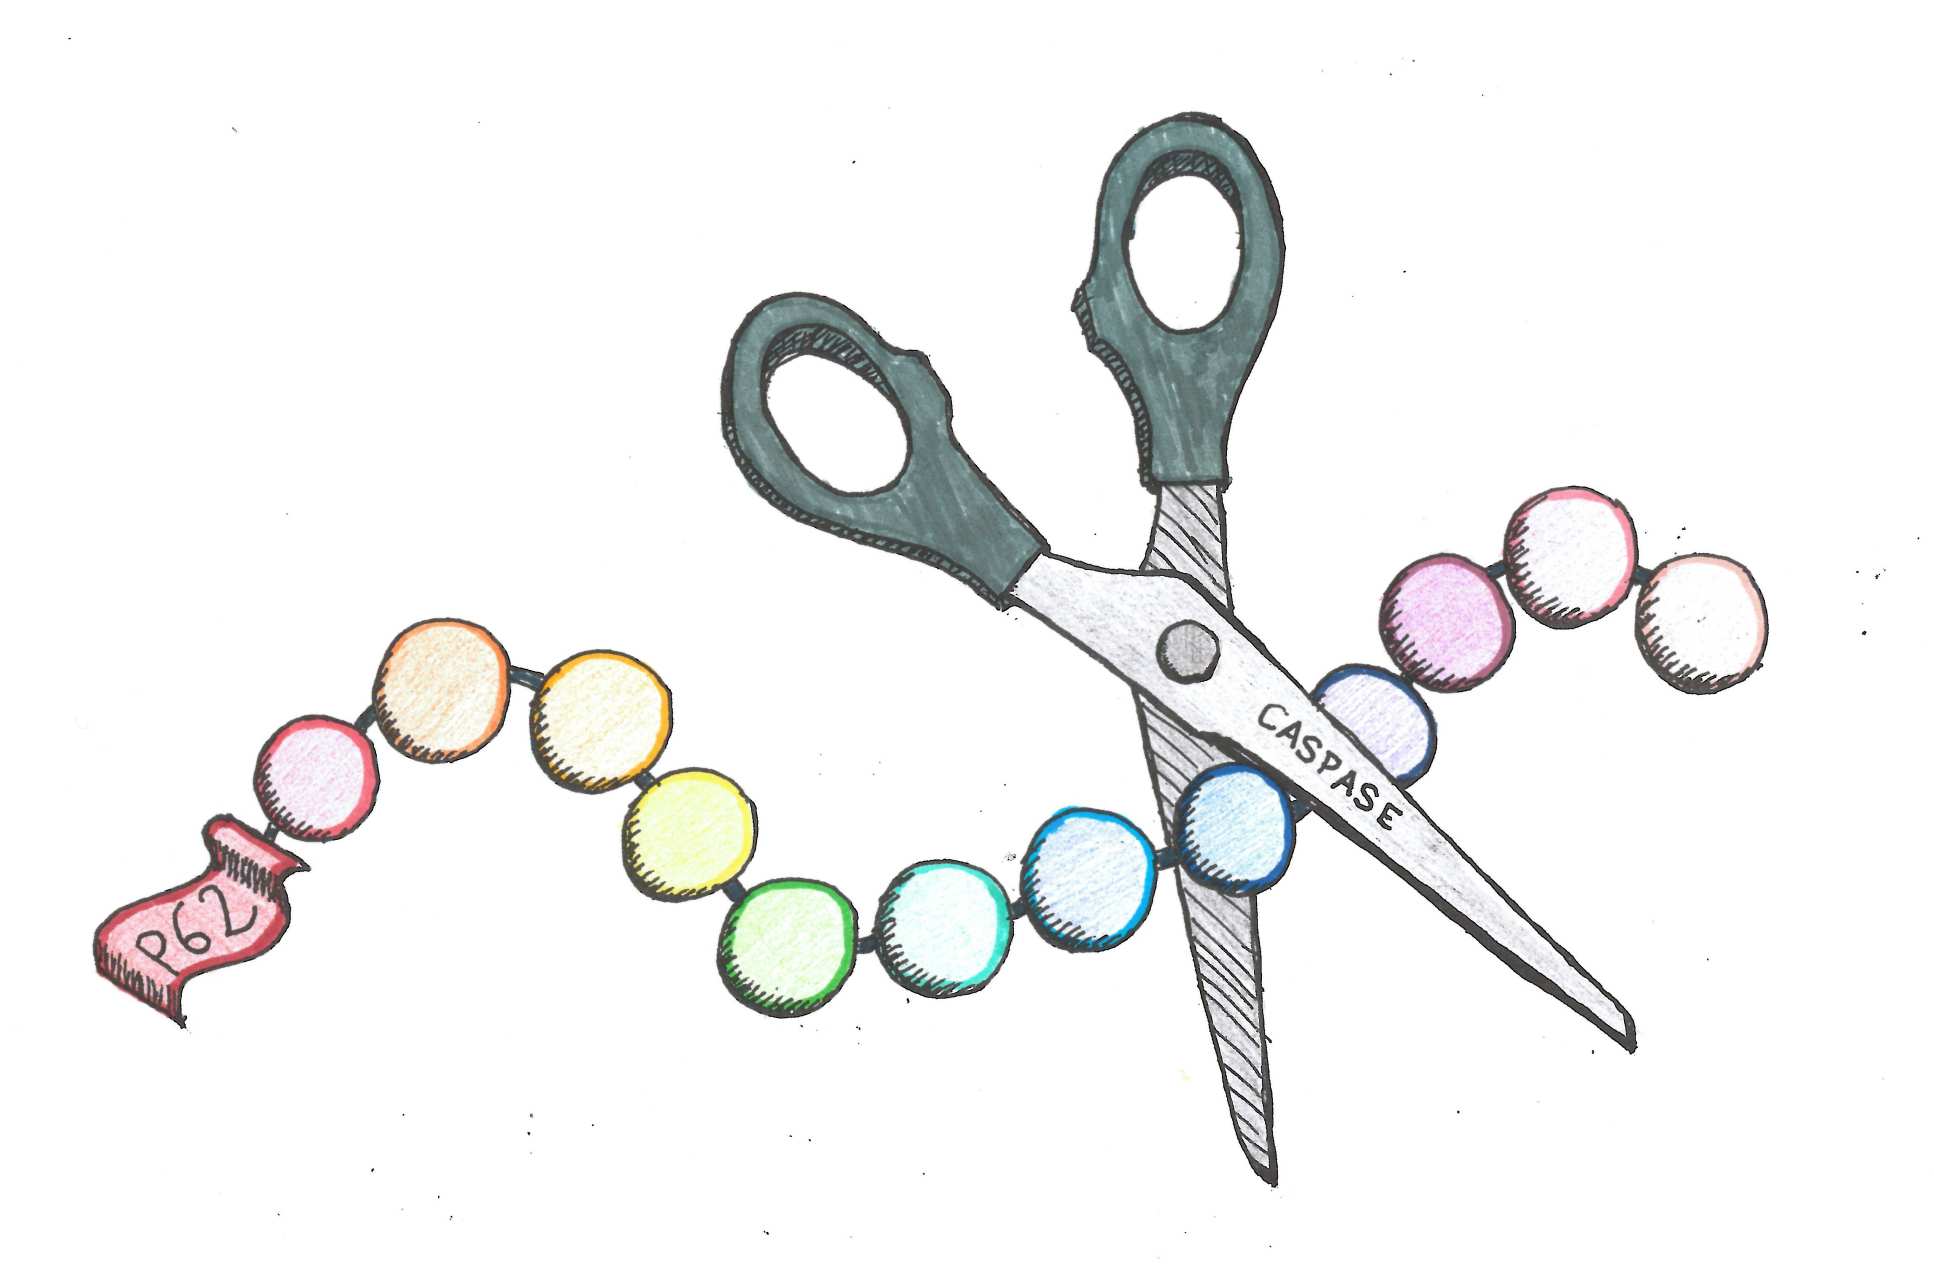 A pair of scissors labelled capase cutting a string of coloured spheres labelled p62